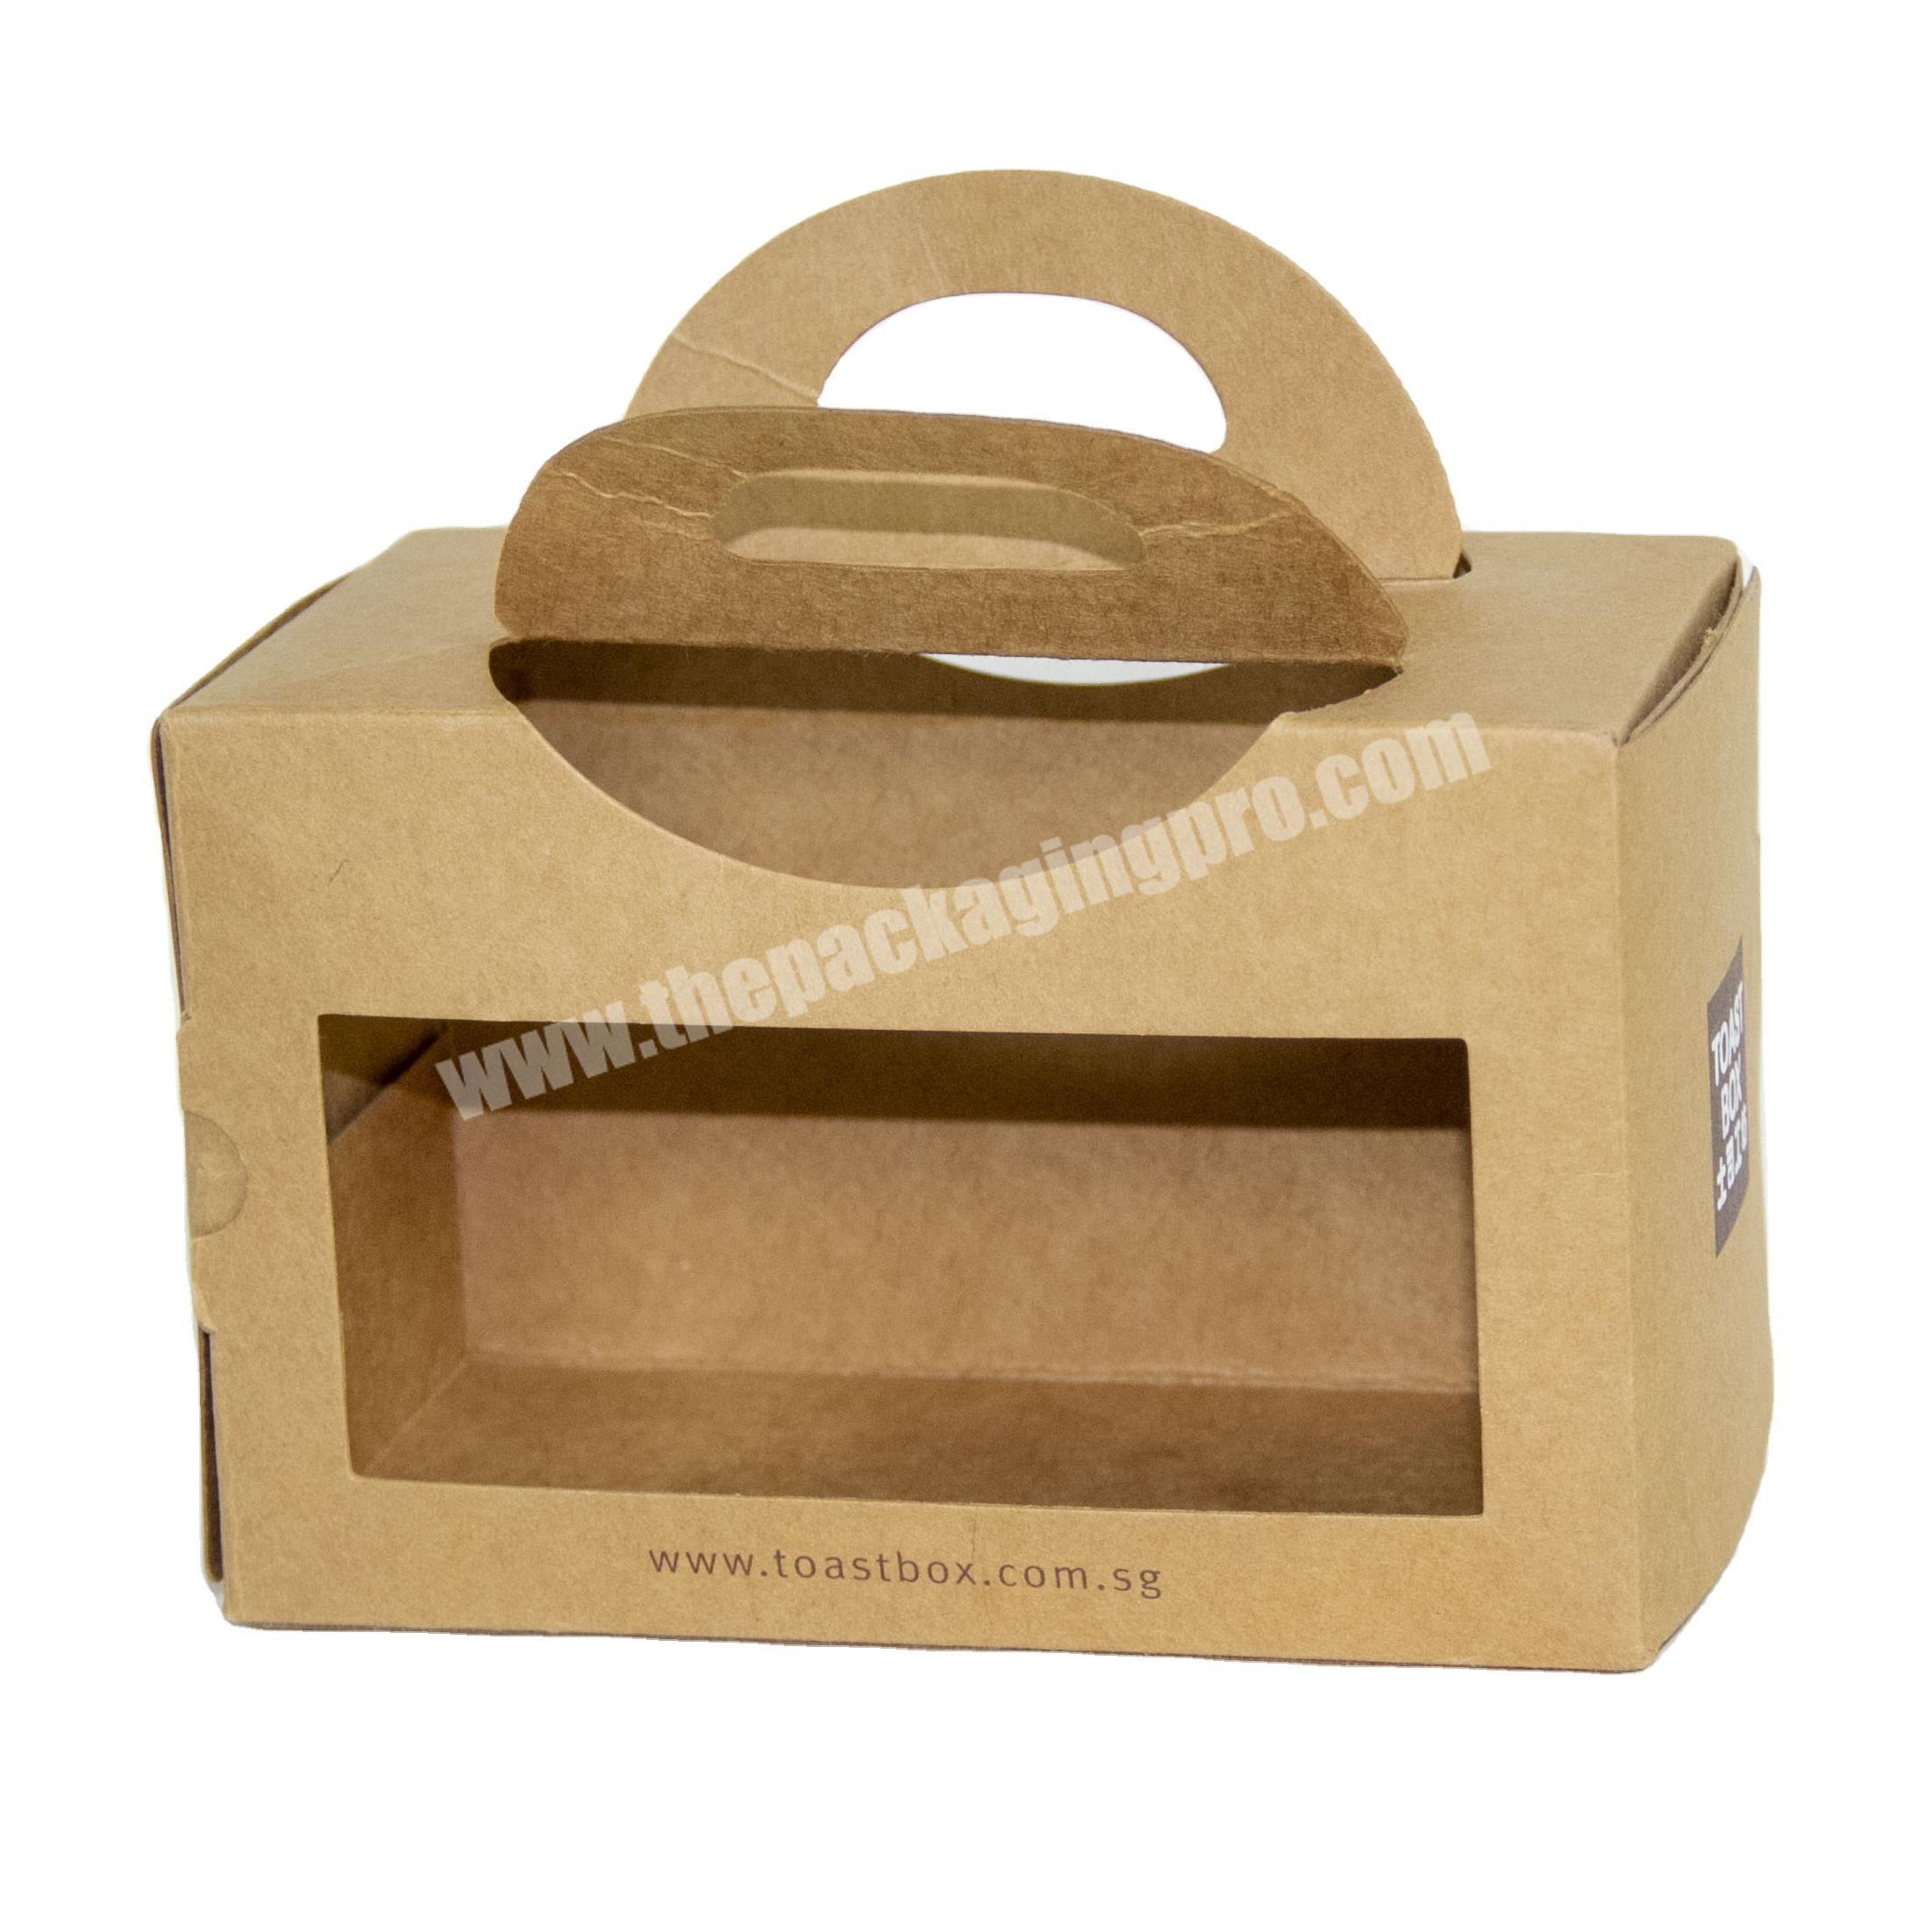 Factory New Product Bakery Cake Packaging Boxes With Handle Wedding Cake Boxes For Guests Cake Pop Box